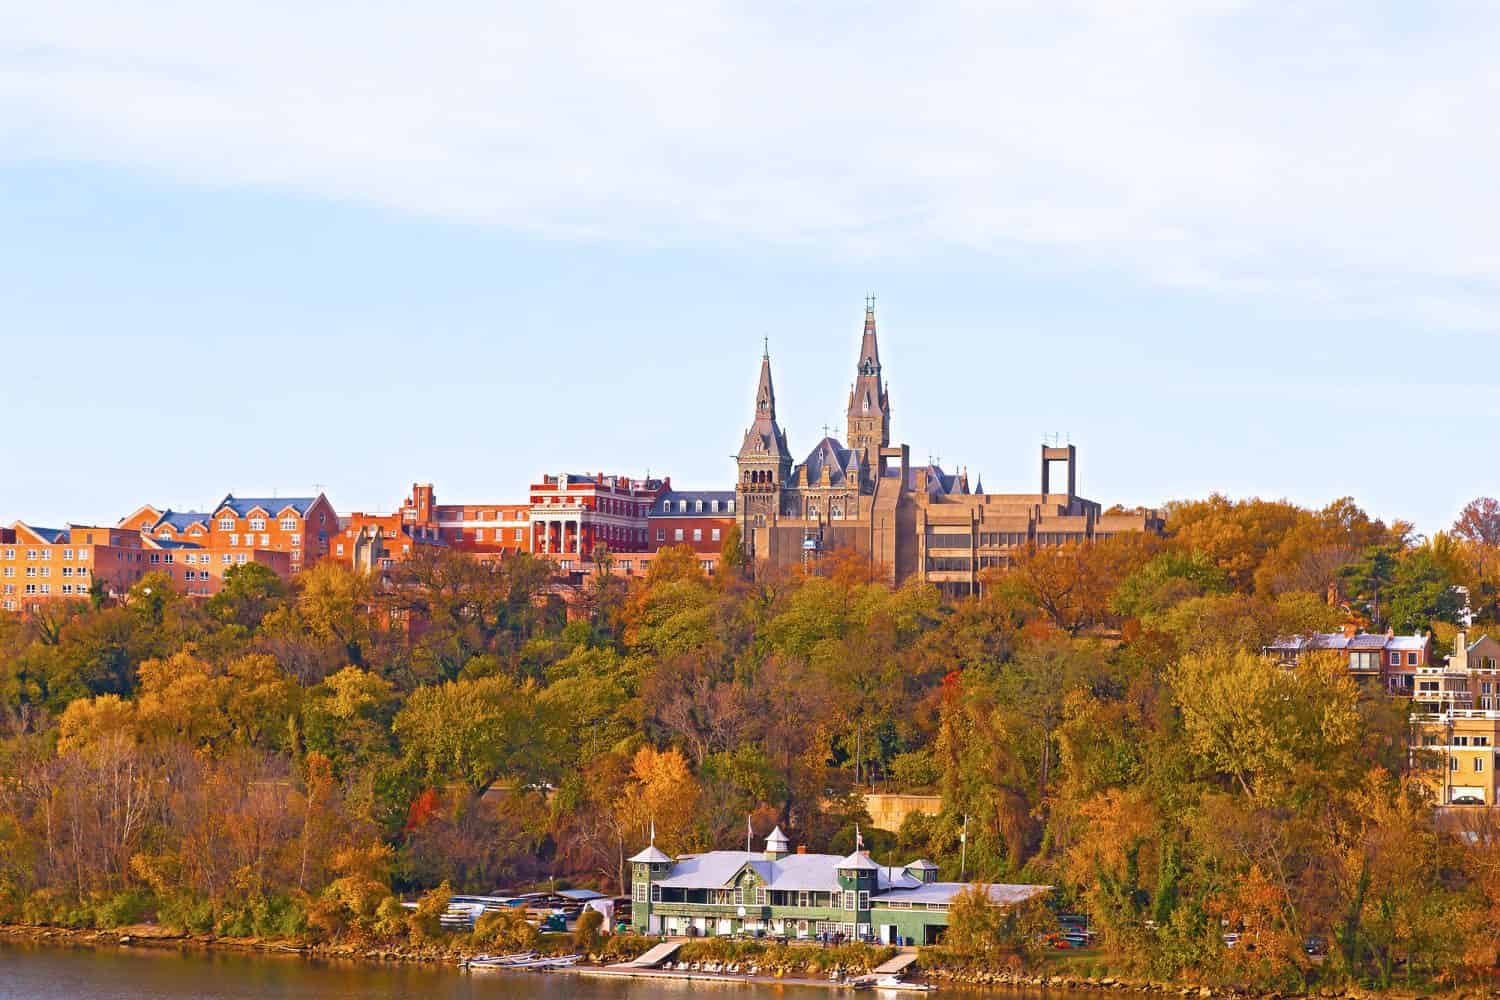 Georgetown University buildings in fall along the Potomac River. Urban scenic panorama in autumn with buildings and recreational facilities.